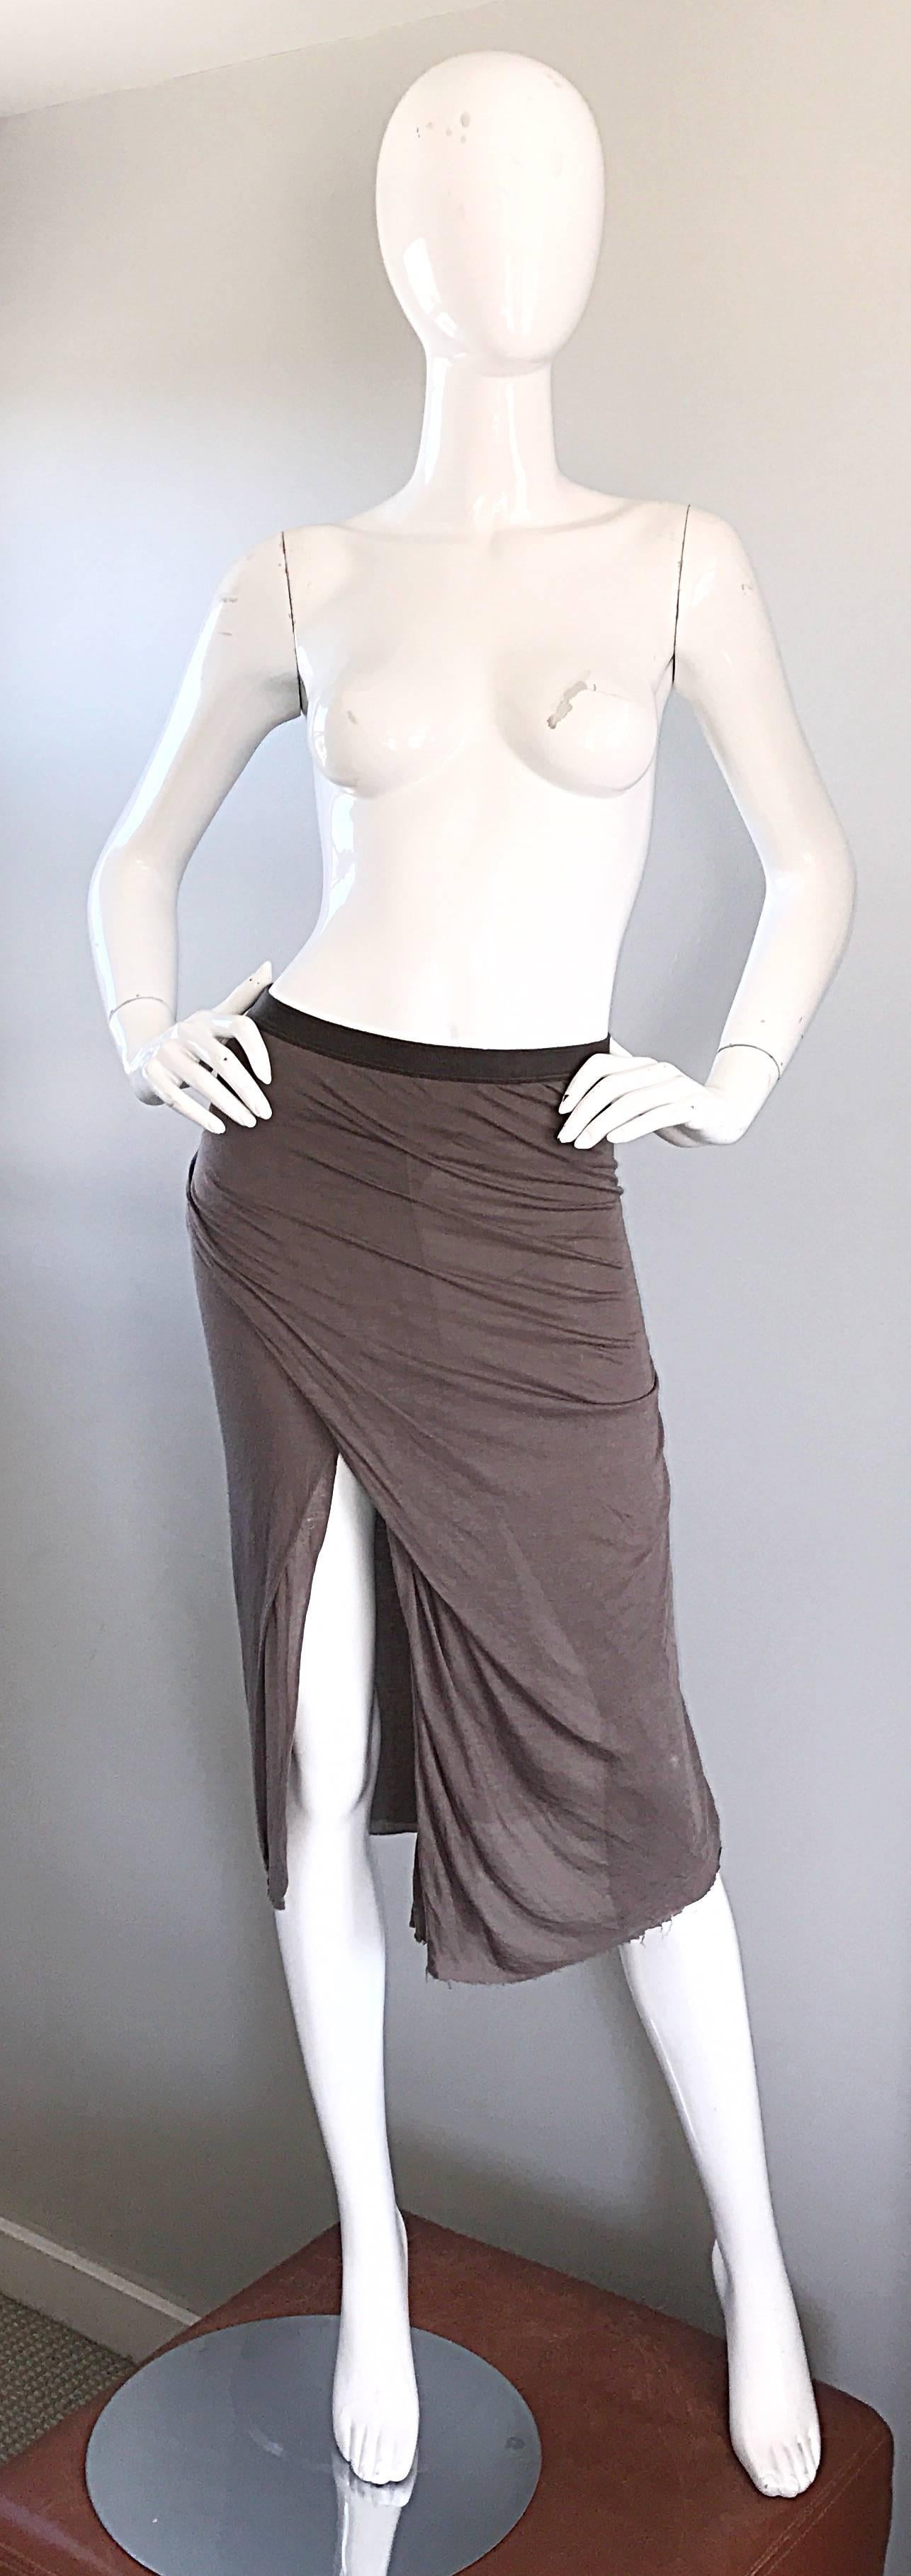 Signature RICK OWENS asymmetrical bodcon skirt or strapless tunic top in 'dust' color! Double layered soft rayon and cotton blend. So much detail to this little gem! Stretches to fit. Unfinished hem with a slit up the side hem. Elastic waistband.